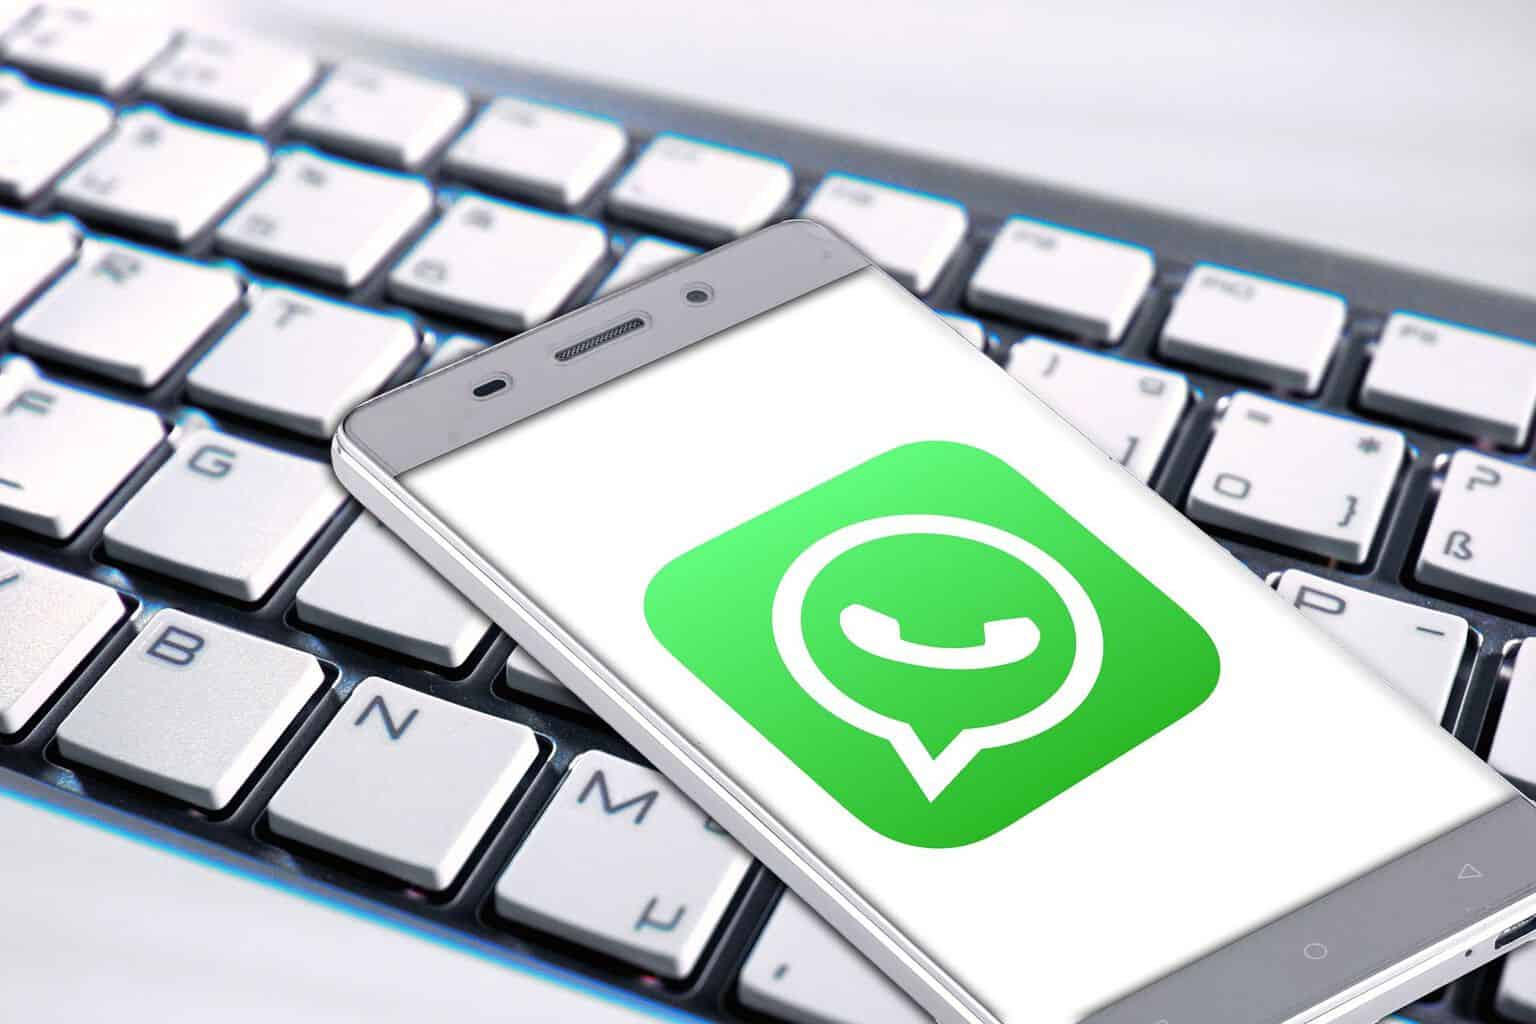 Download WhatsApp Plus Apk on Your Android Phone 1